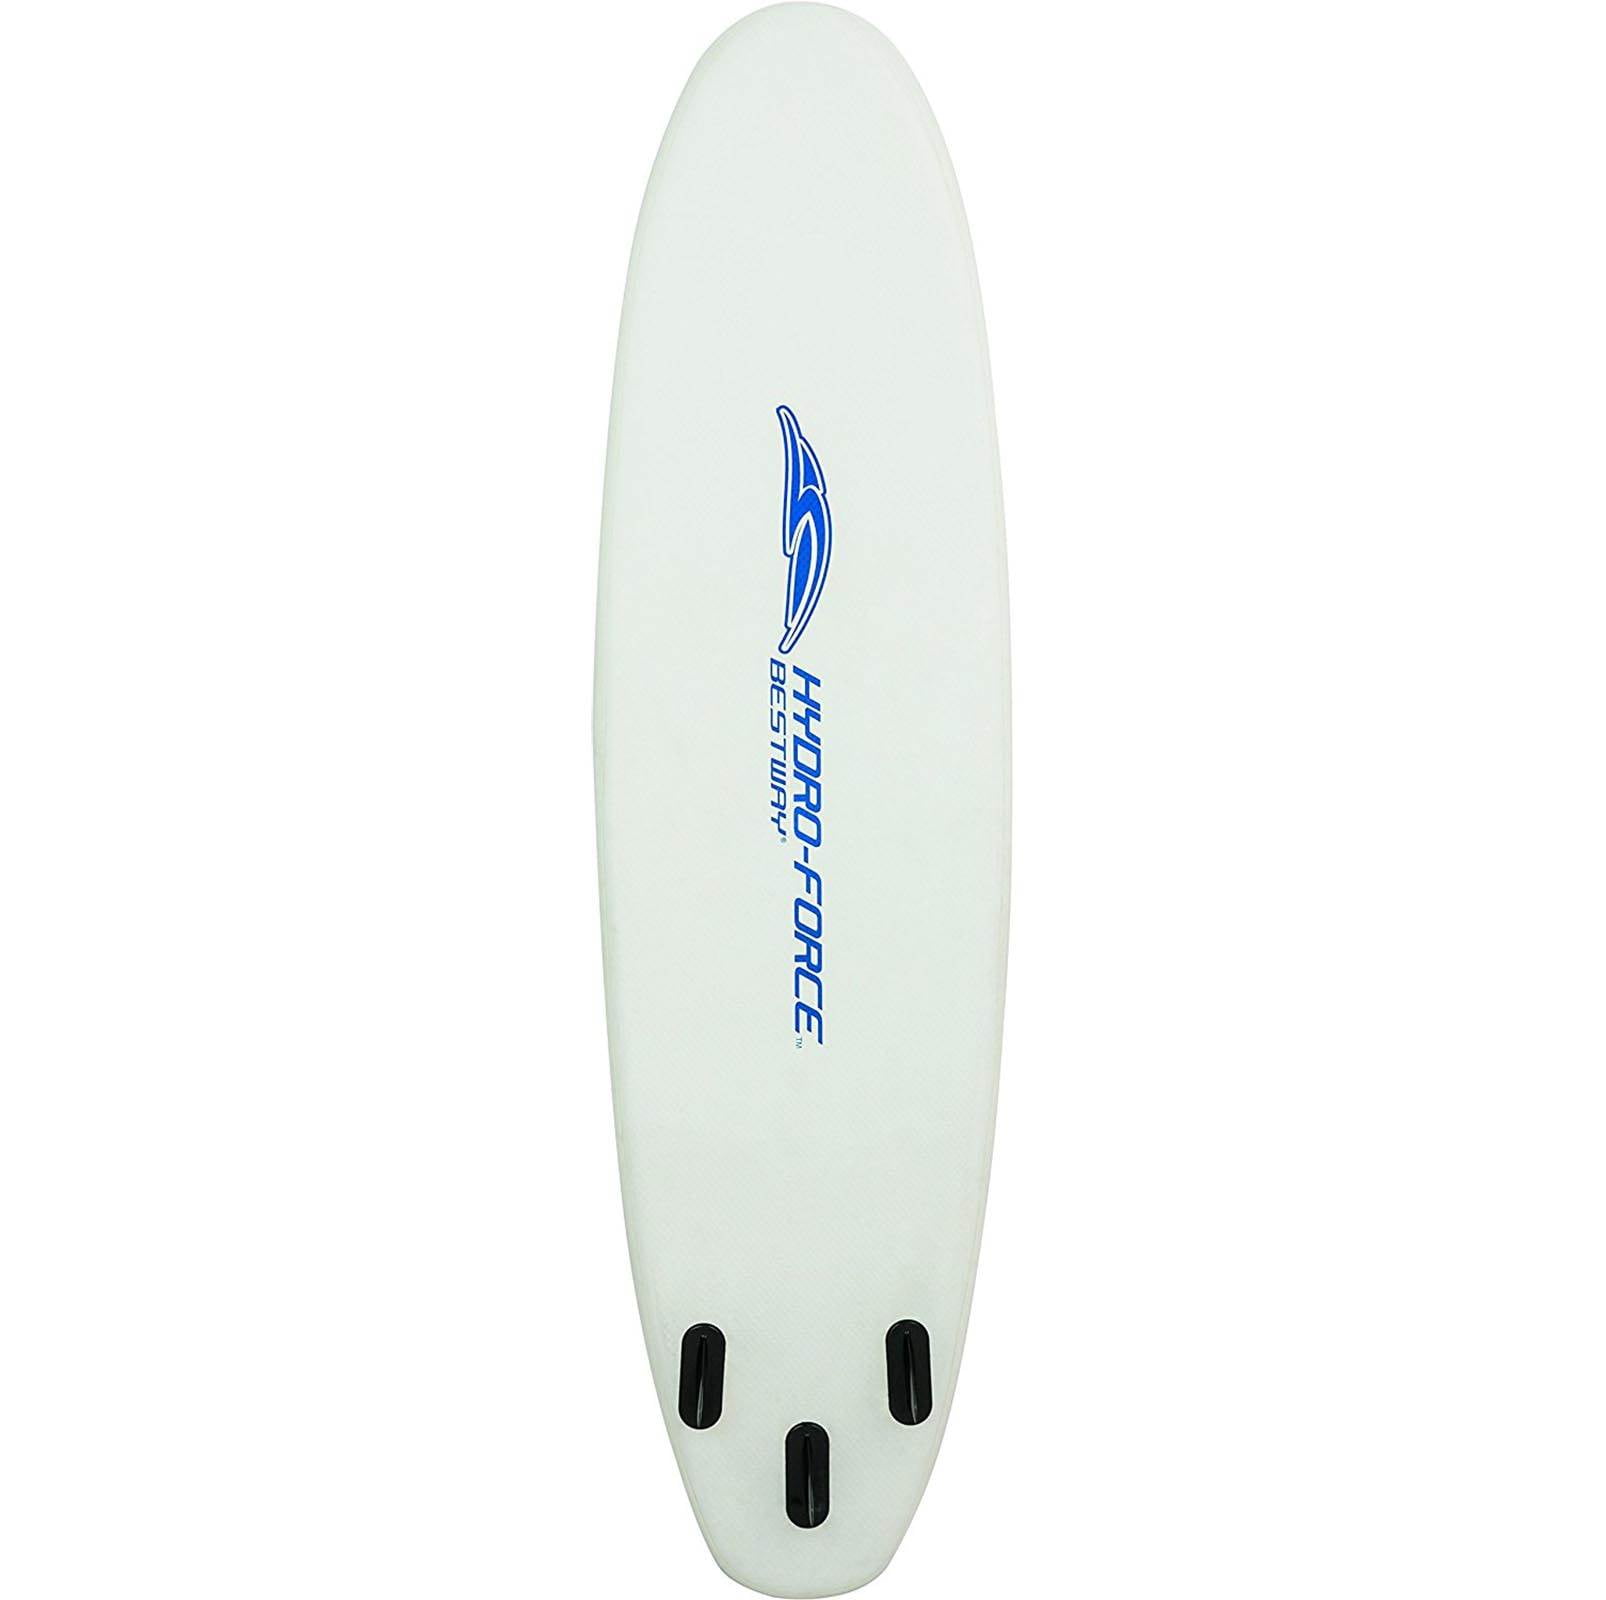 Bestway Hydro-Force White Cap Inflatable Stand Up Paddle Board - 2